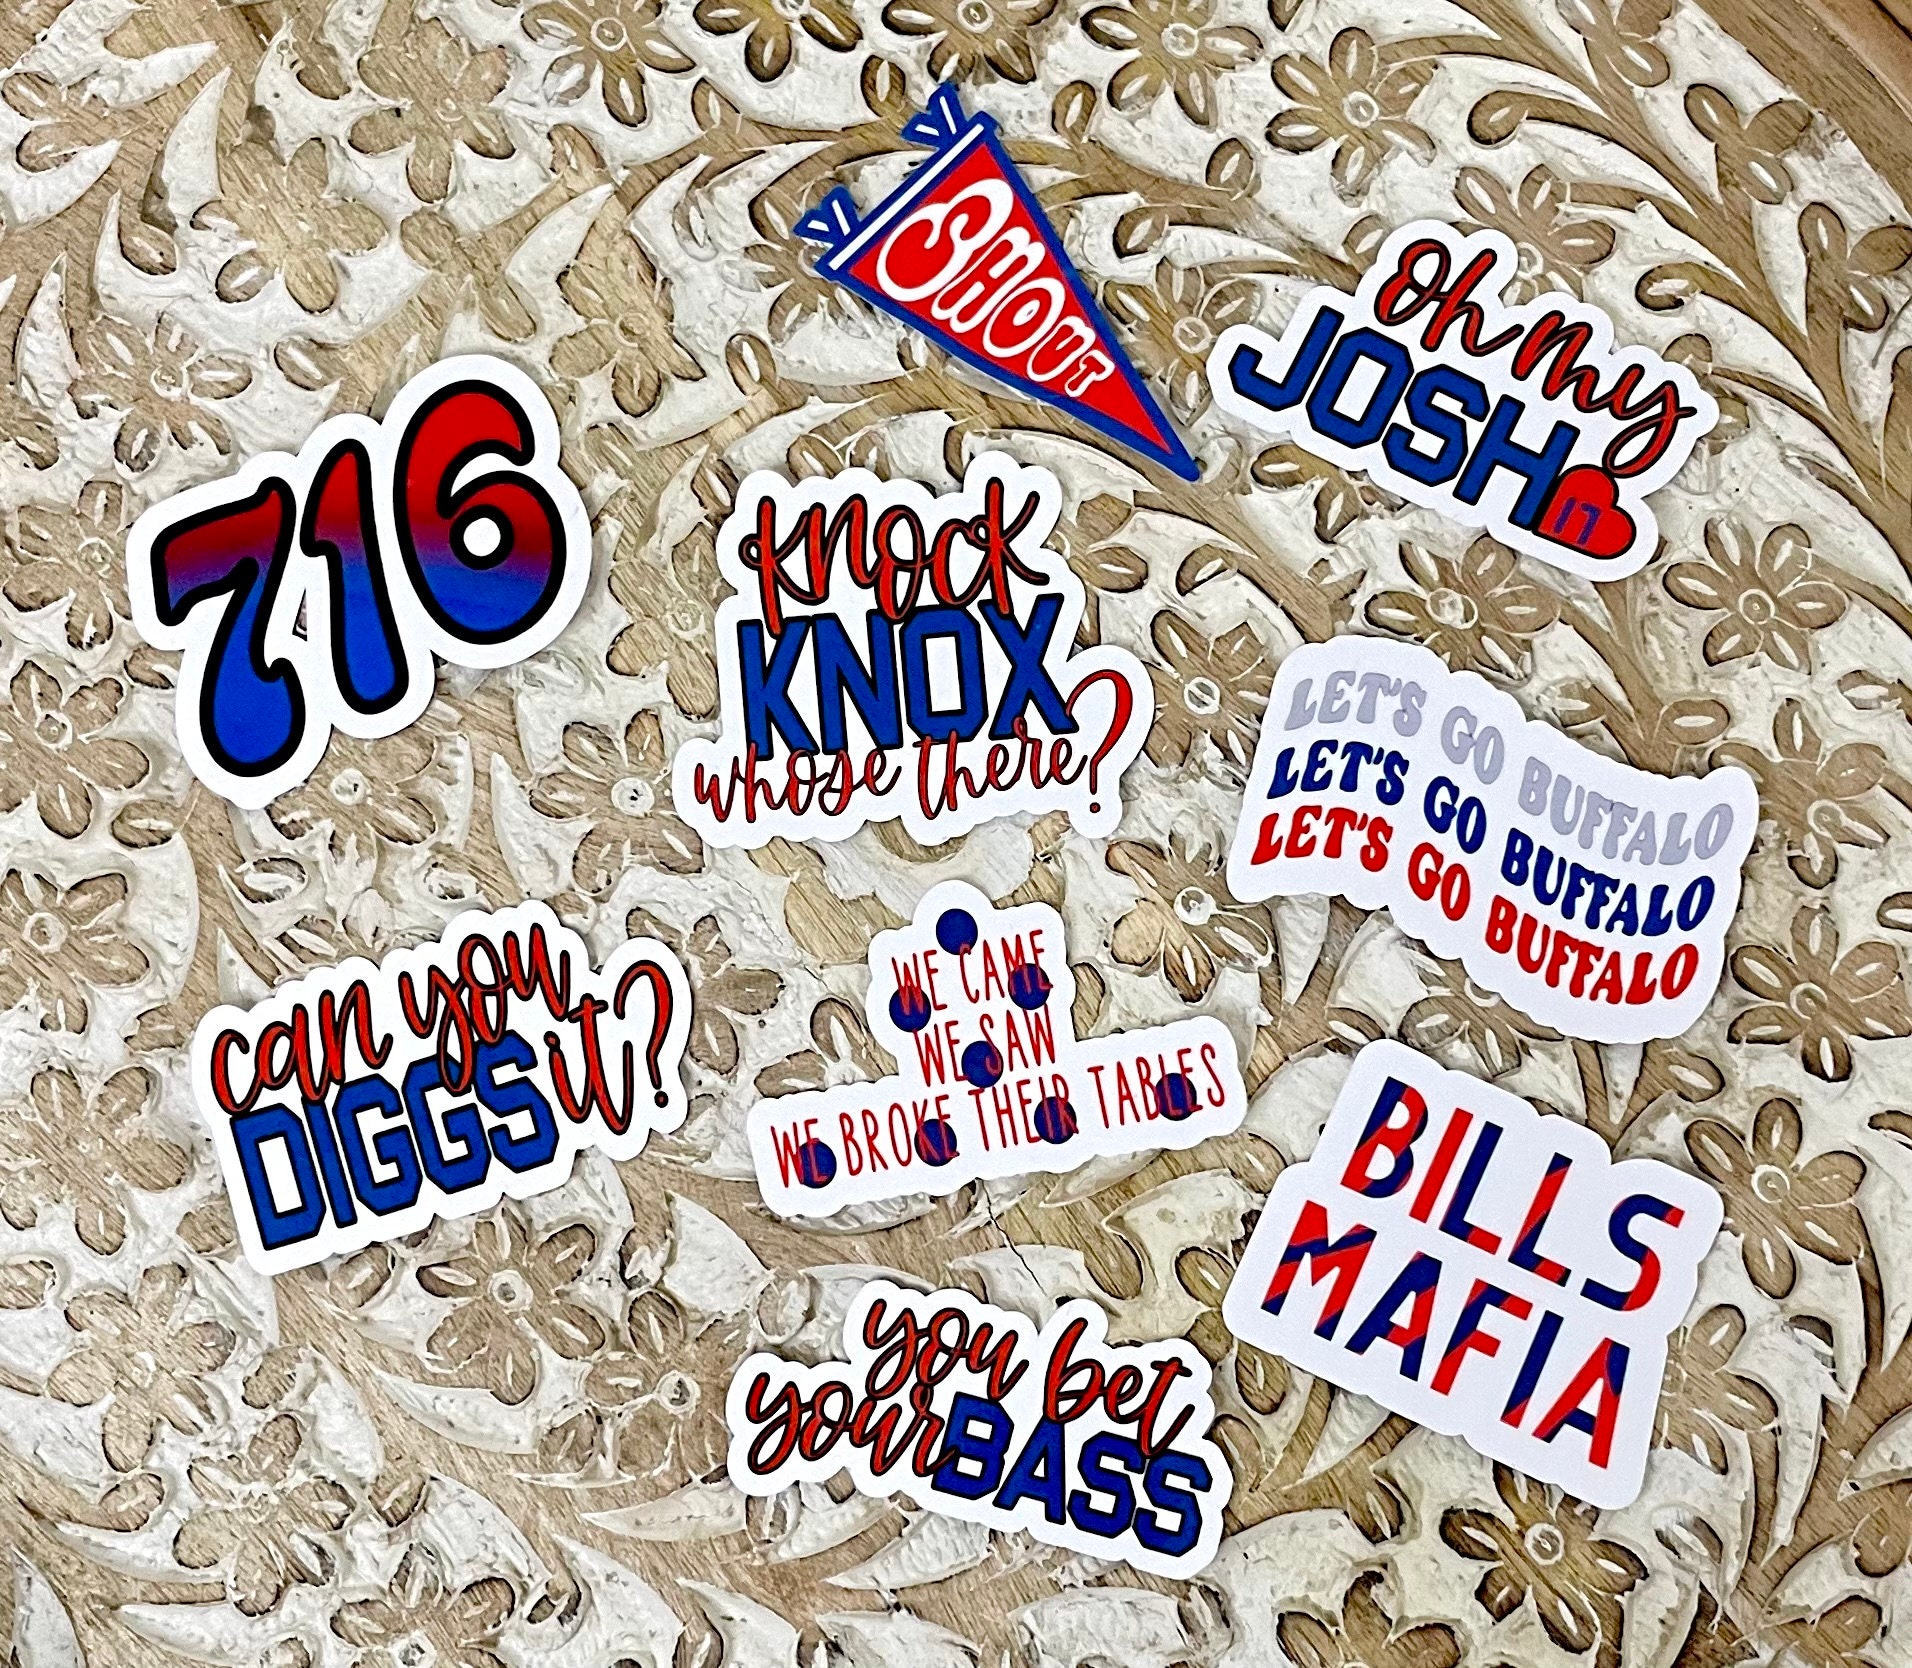 Buffalo Bills vintage embroidered iron on patch 3.25” X 2.75”